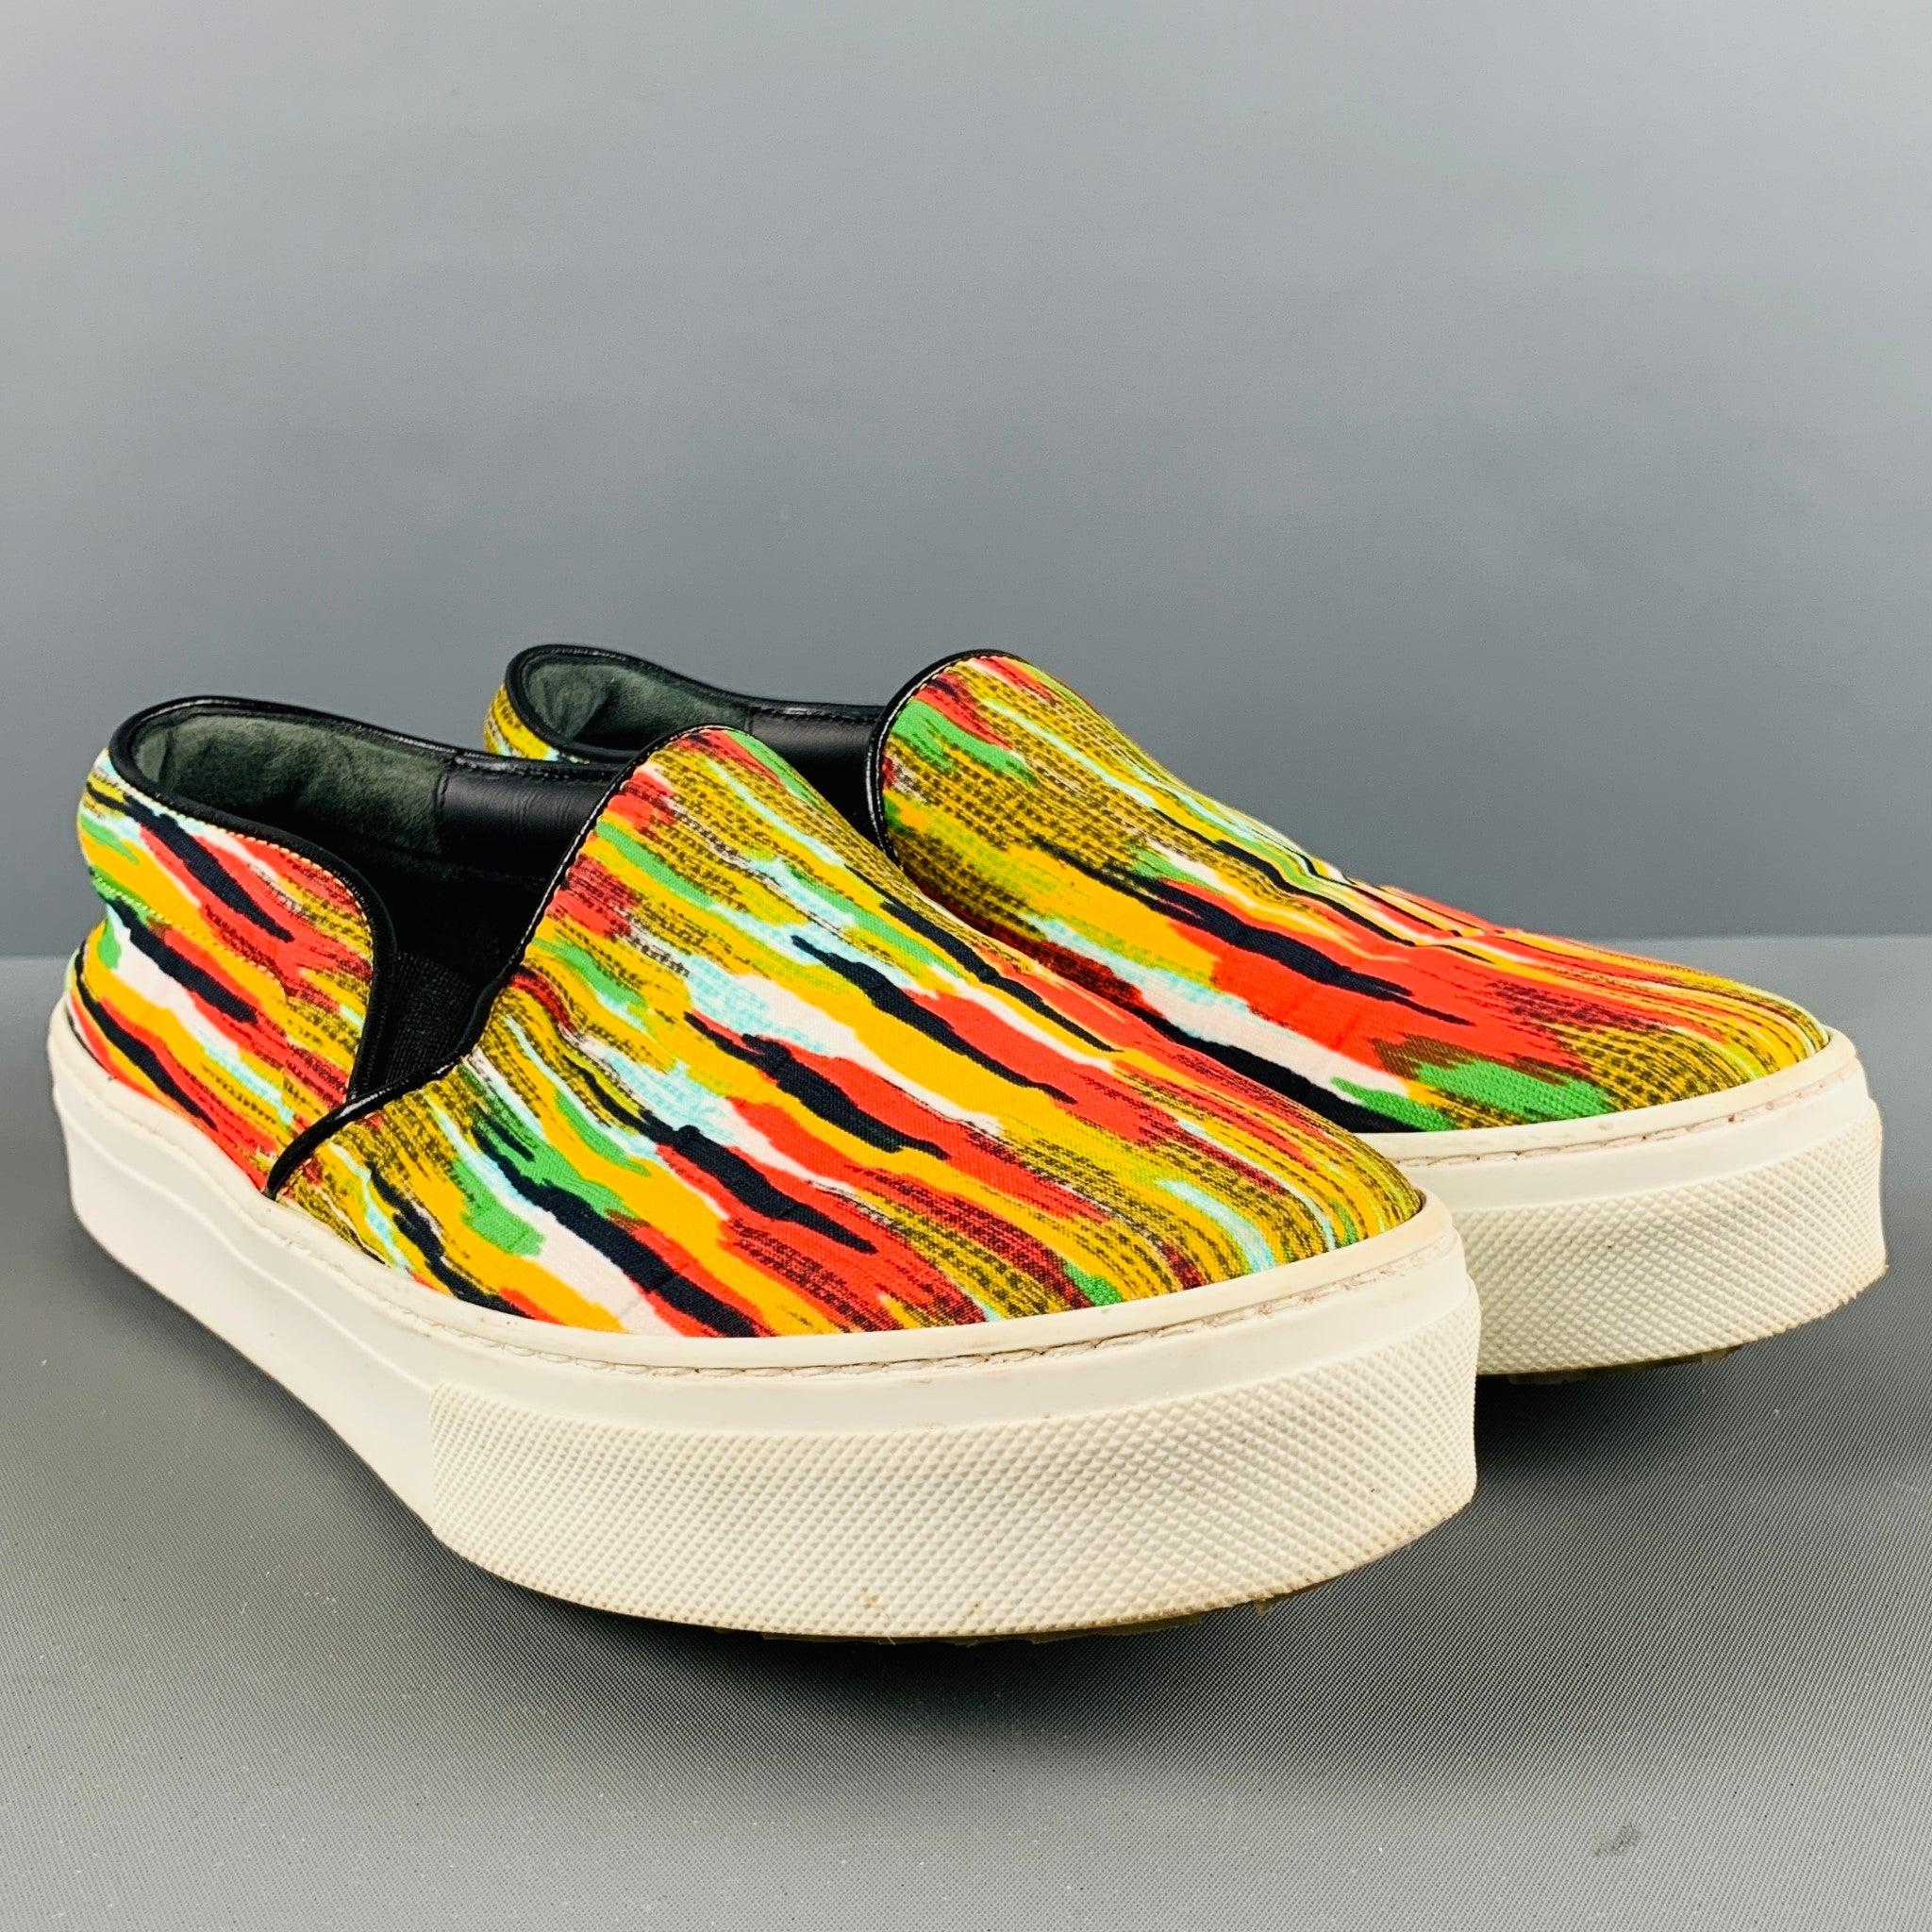 CELINE sneakers in a multi- color stripped fabric featuring slip on style, and rubber sole. Made in Italy.Very Good Pre-Owned Condition.  

Marked:   37Outsole:10.25 inches  x 3.75 inches  

  
  
 
Reference No.: 128320
Category: Sneakers
More